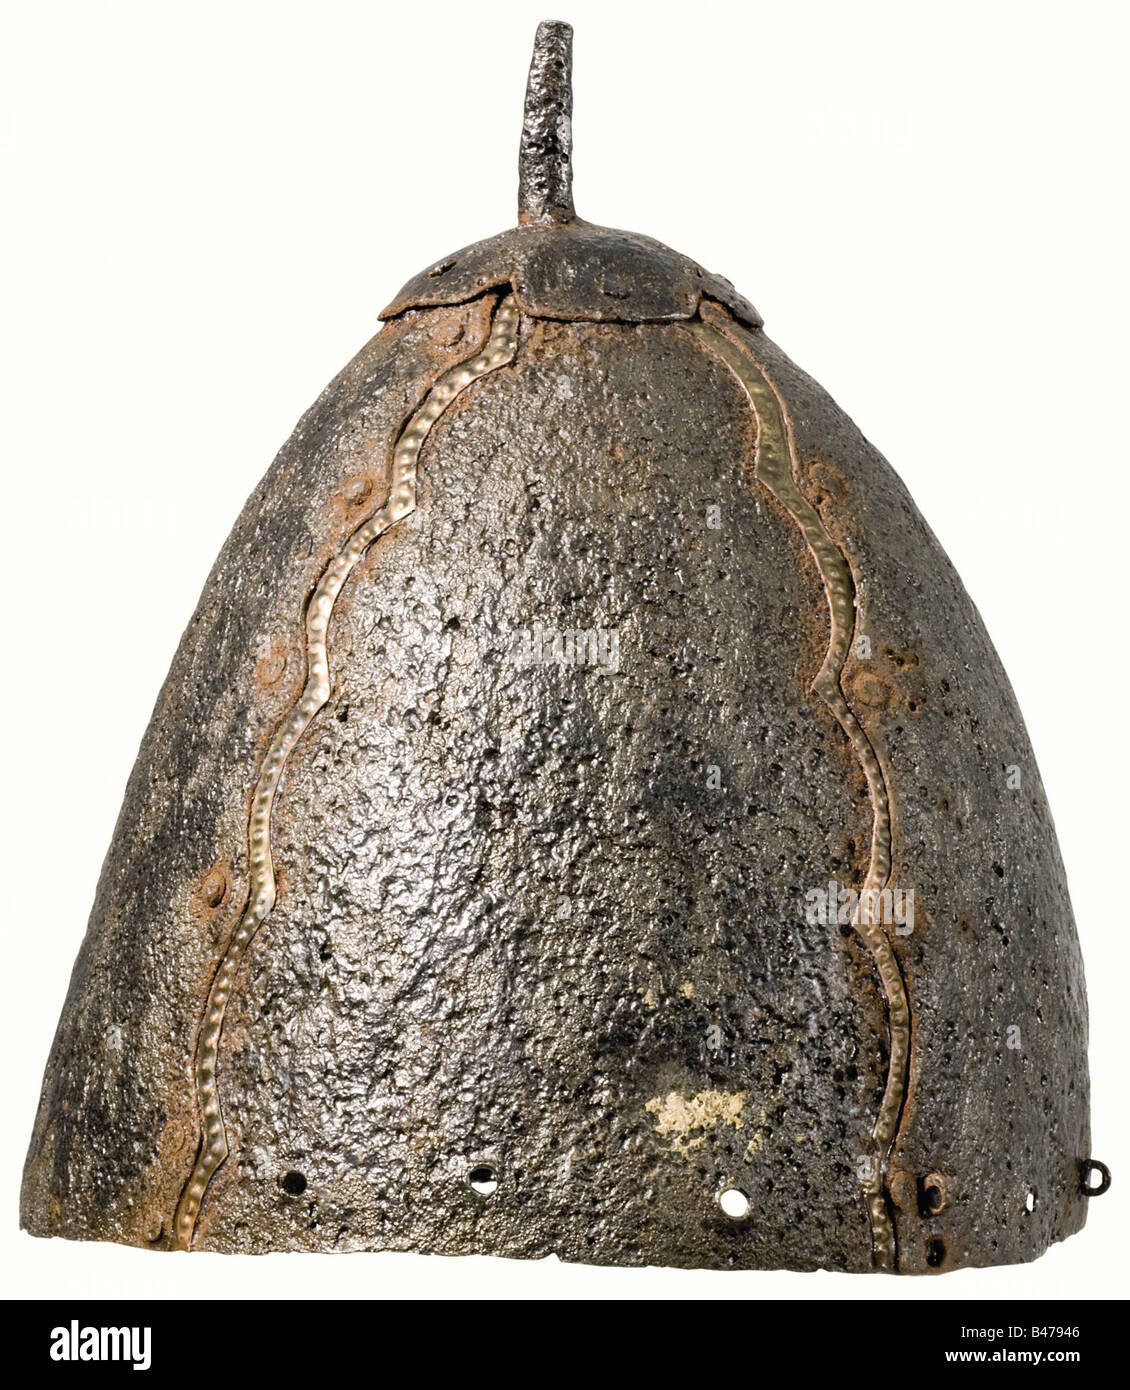 A conical helmet, Hungarian/Magyar, 10th/11th centuries. Conical iron skull made of four riveted segments. There are narrow decorative bronze engraved bands riveted on the curved edges of the plates. Riveted top plate with a round plume socket. There are lining holes around the lower edge as well as four riveted rings for fastening the mail coif. Cleaned excavation discovery. It comes with two pictures showing it in the condition as originally found. Height 22 cm. Extremely rare helmet type of the early, high Middle Ages. A comparable specimen is to be found in, Stock Photo